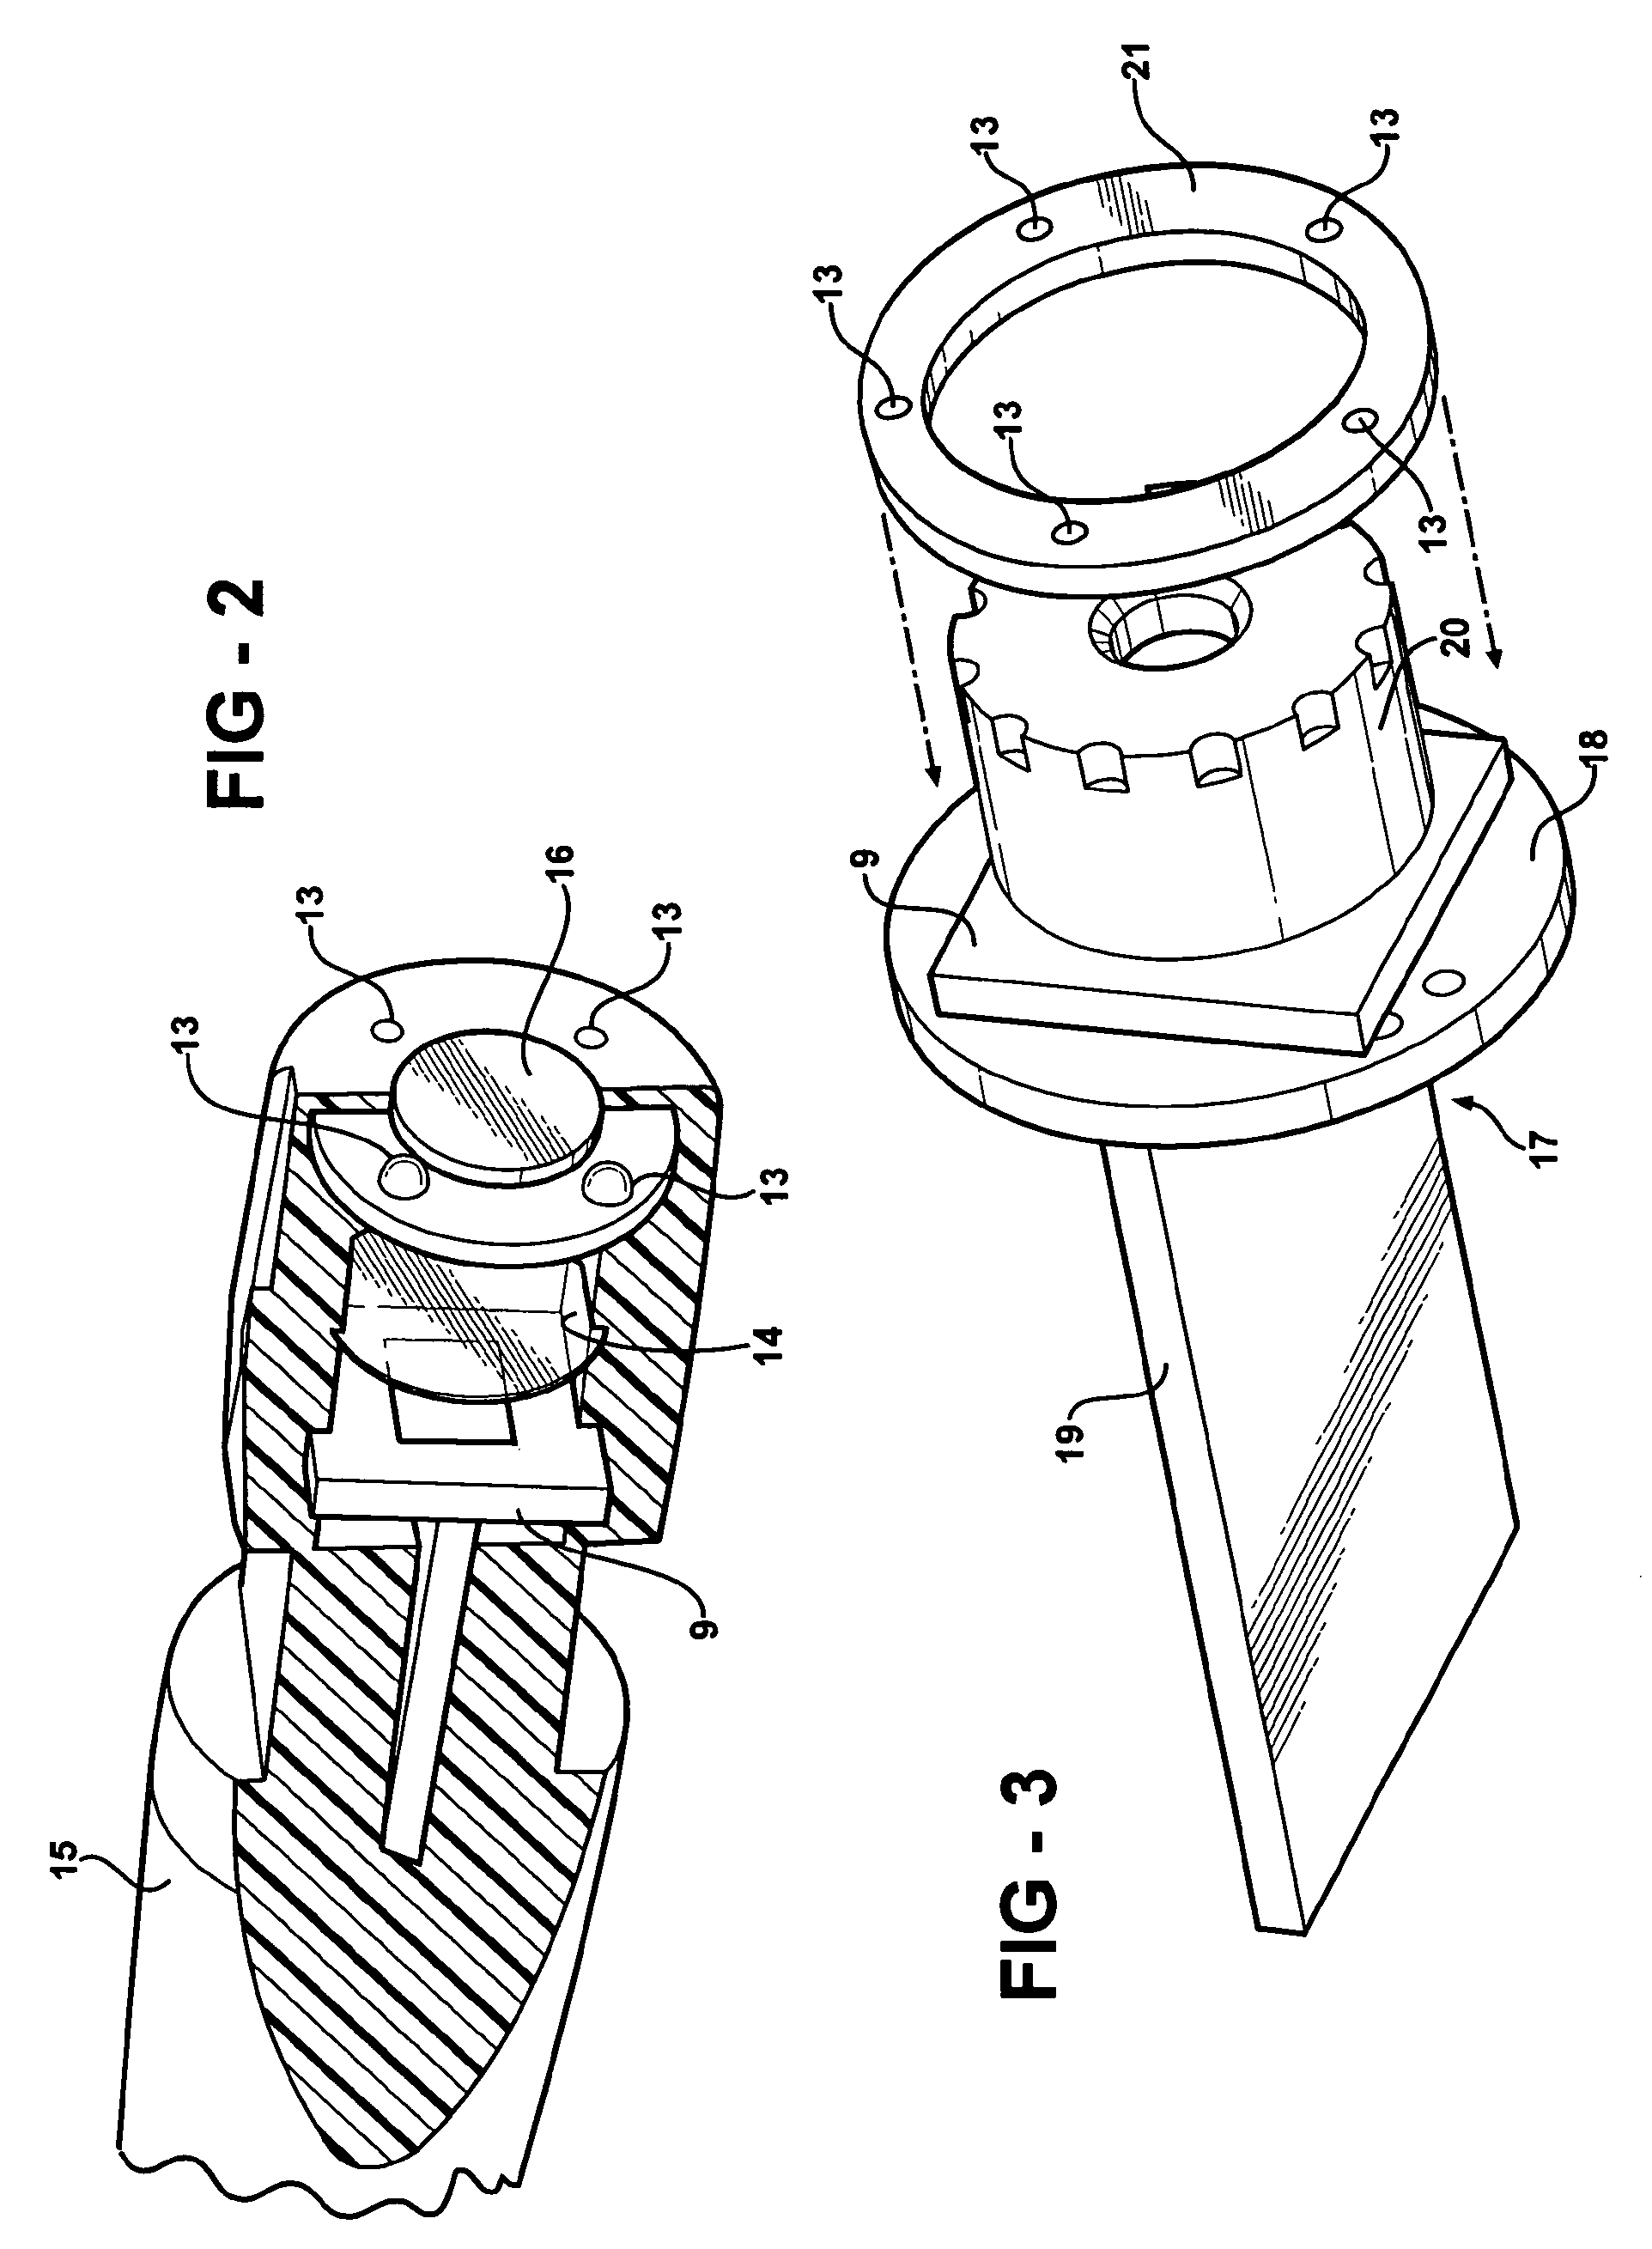 Remote inspection device